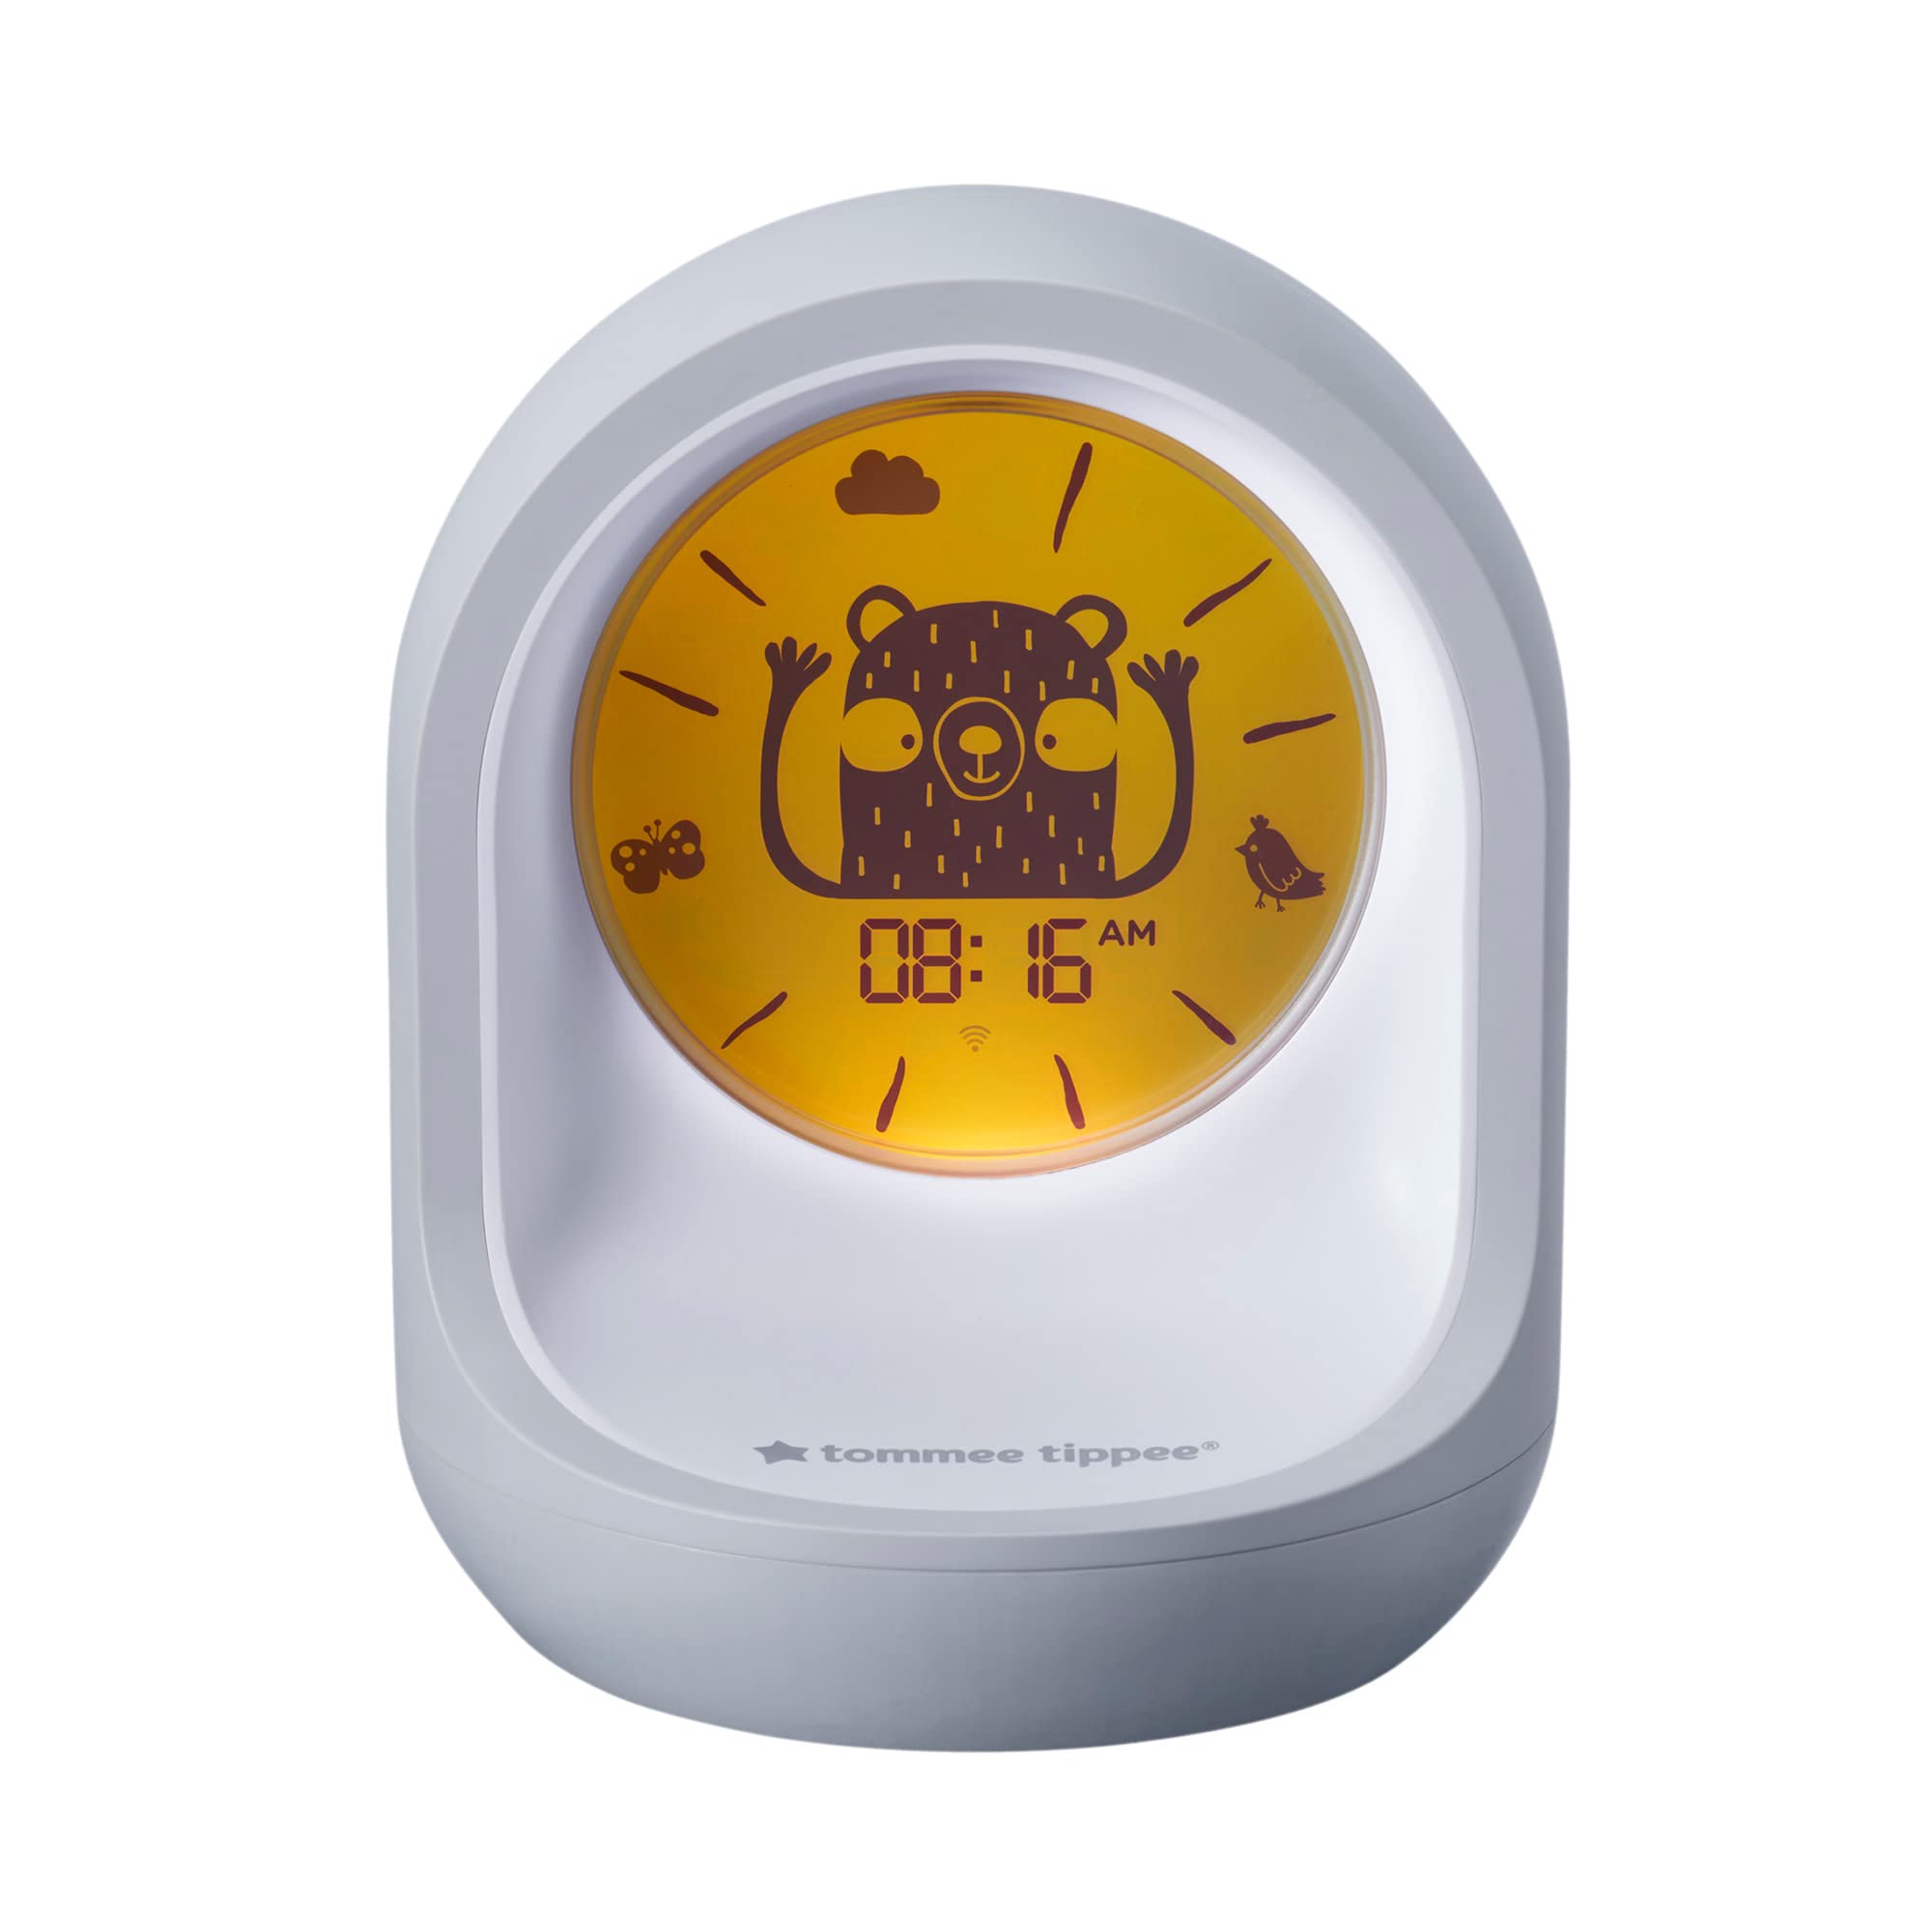 Tommee Tippee Sleep Trainer Clock, Timekeeper Connected Sleep Aid, From the Creators of the Groclock, App-Enabled Alarm Clock and Nightlight for Children